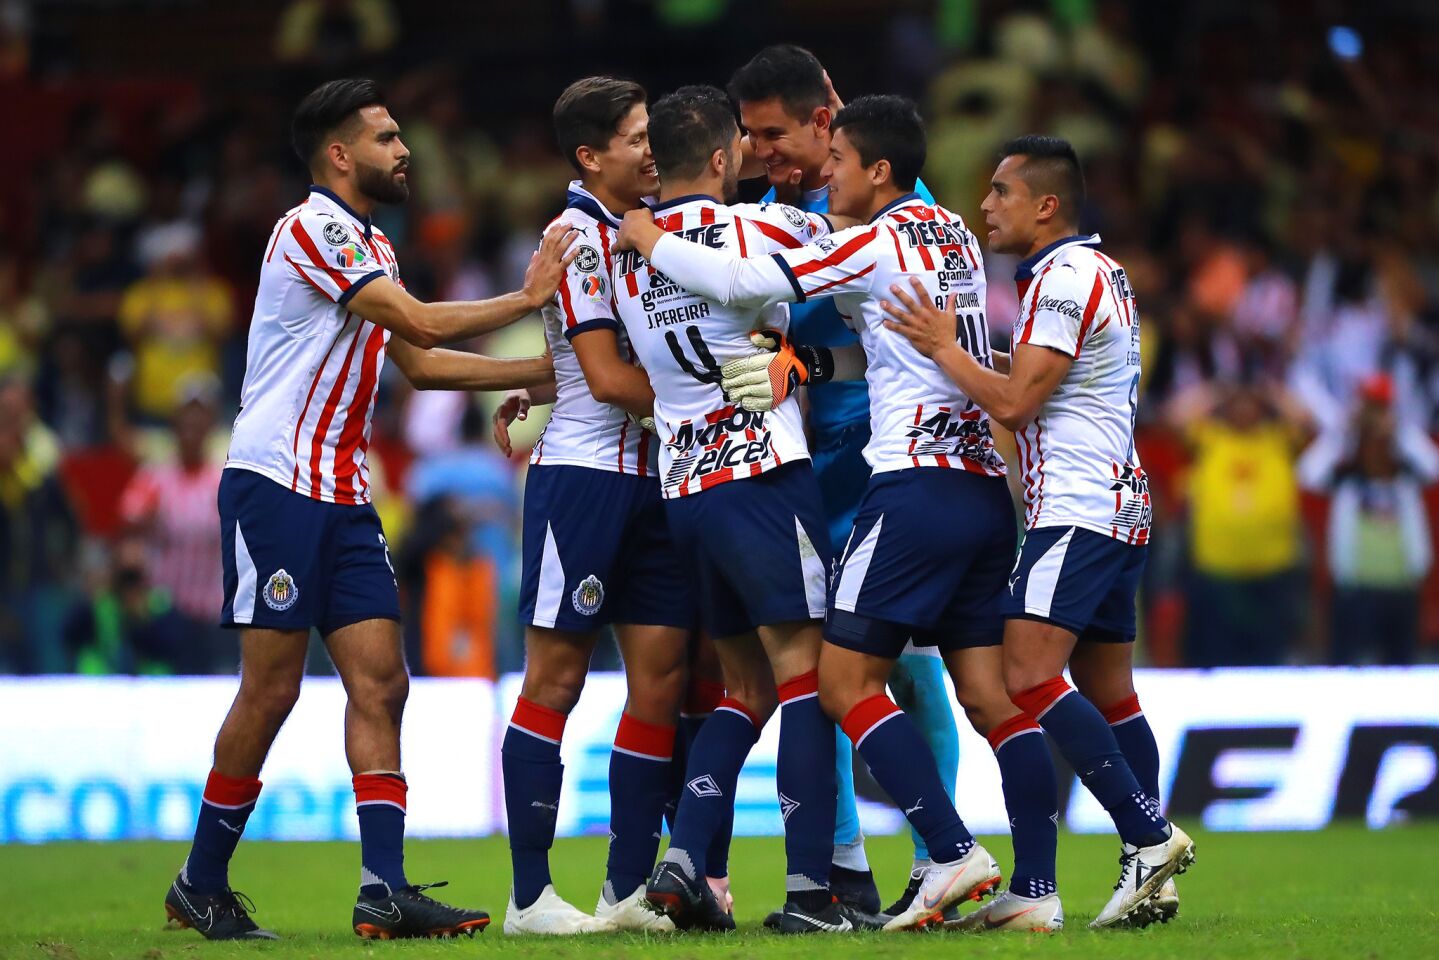 Raul Gudiño #1 of Chivas celebrates with teammates after stopping a penalty kick during the 11th round match between America and Chivas as part of the Torneo Apertura 2018 Liga MX at Azteca Stadium on September 30, 2018 in Mexico City, Mexico.